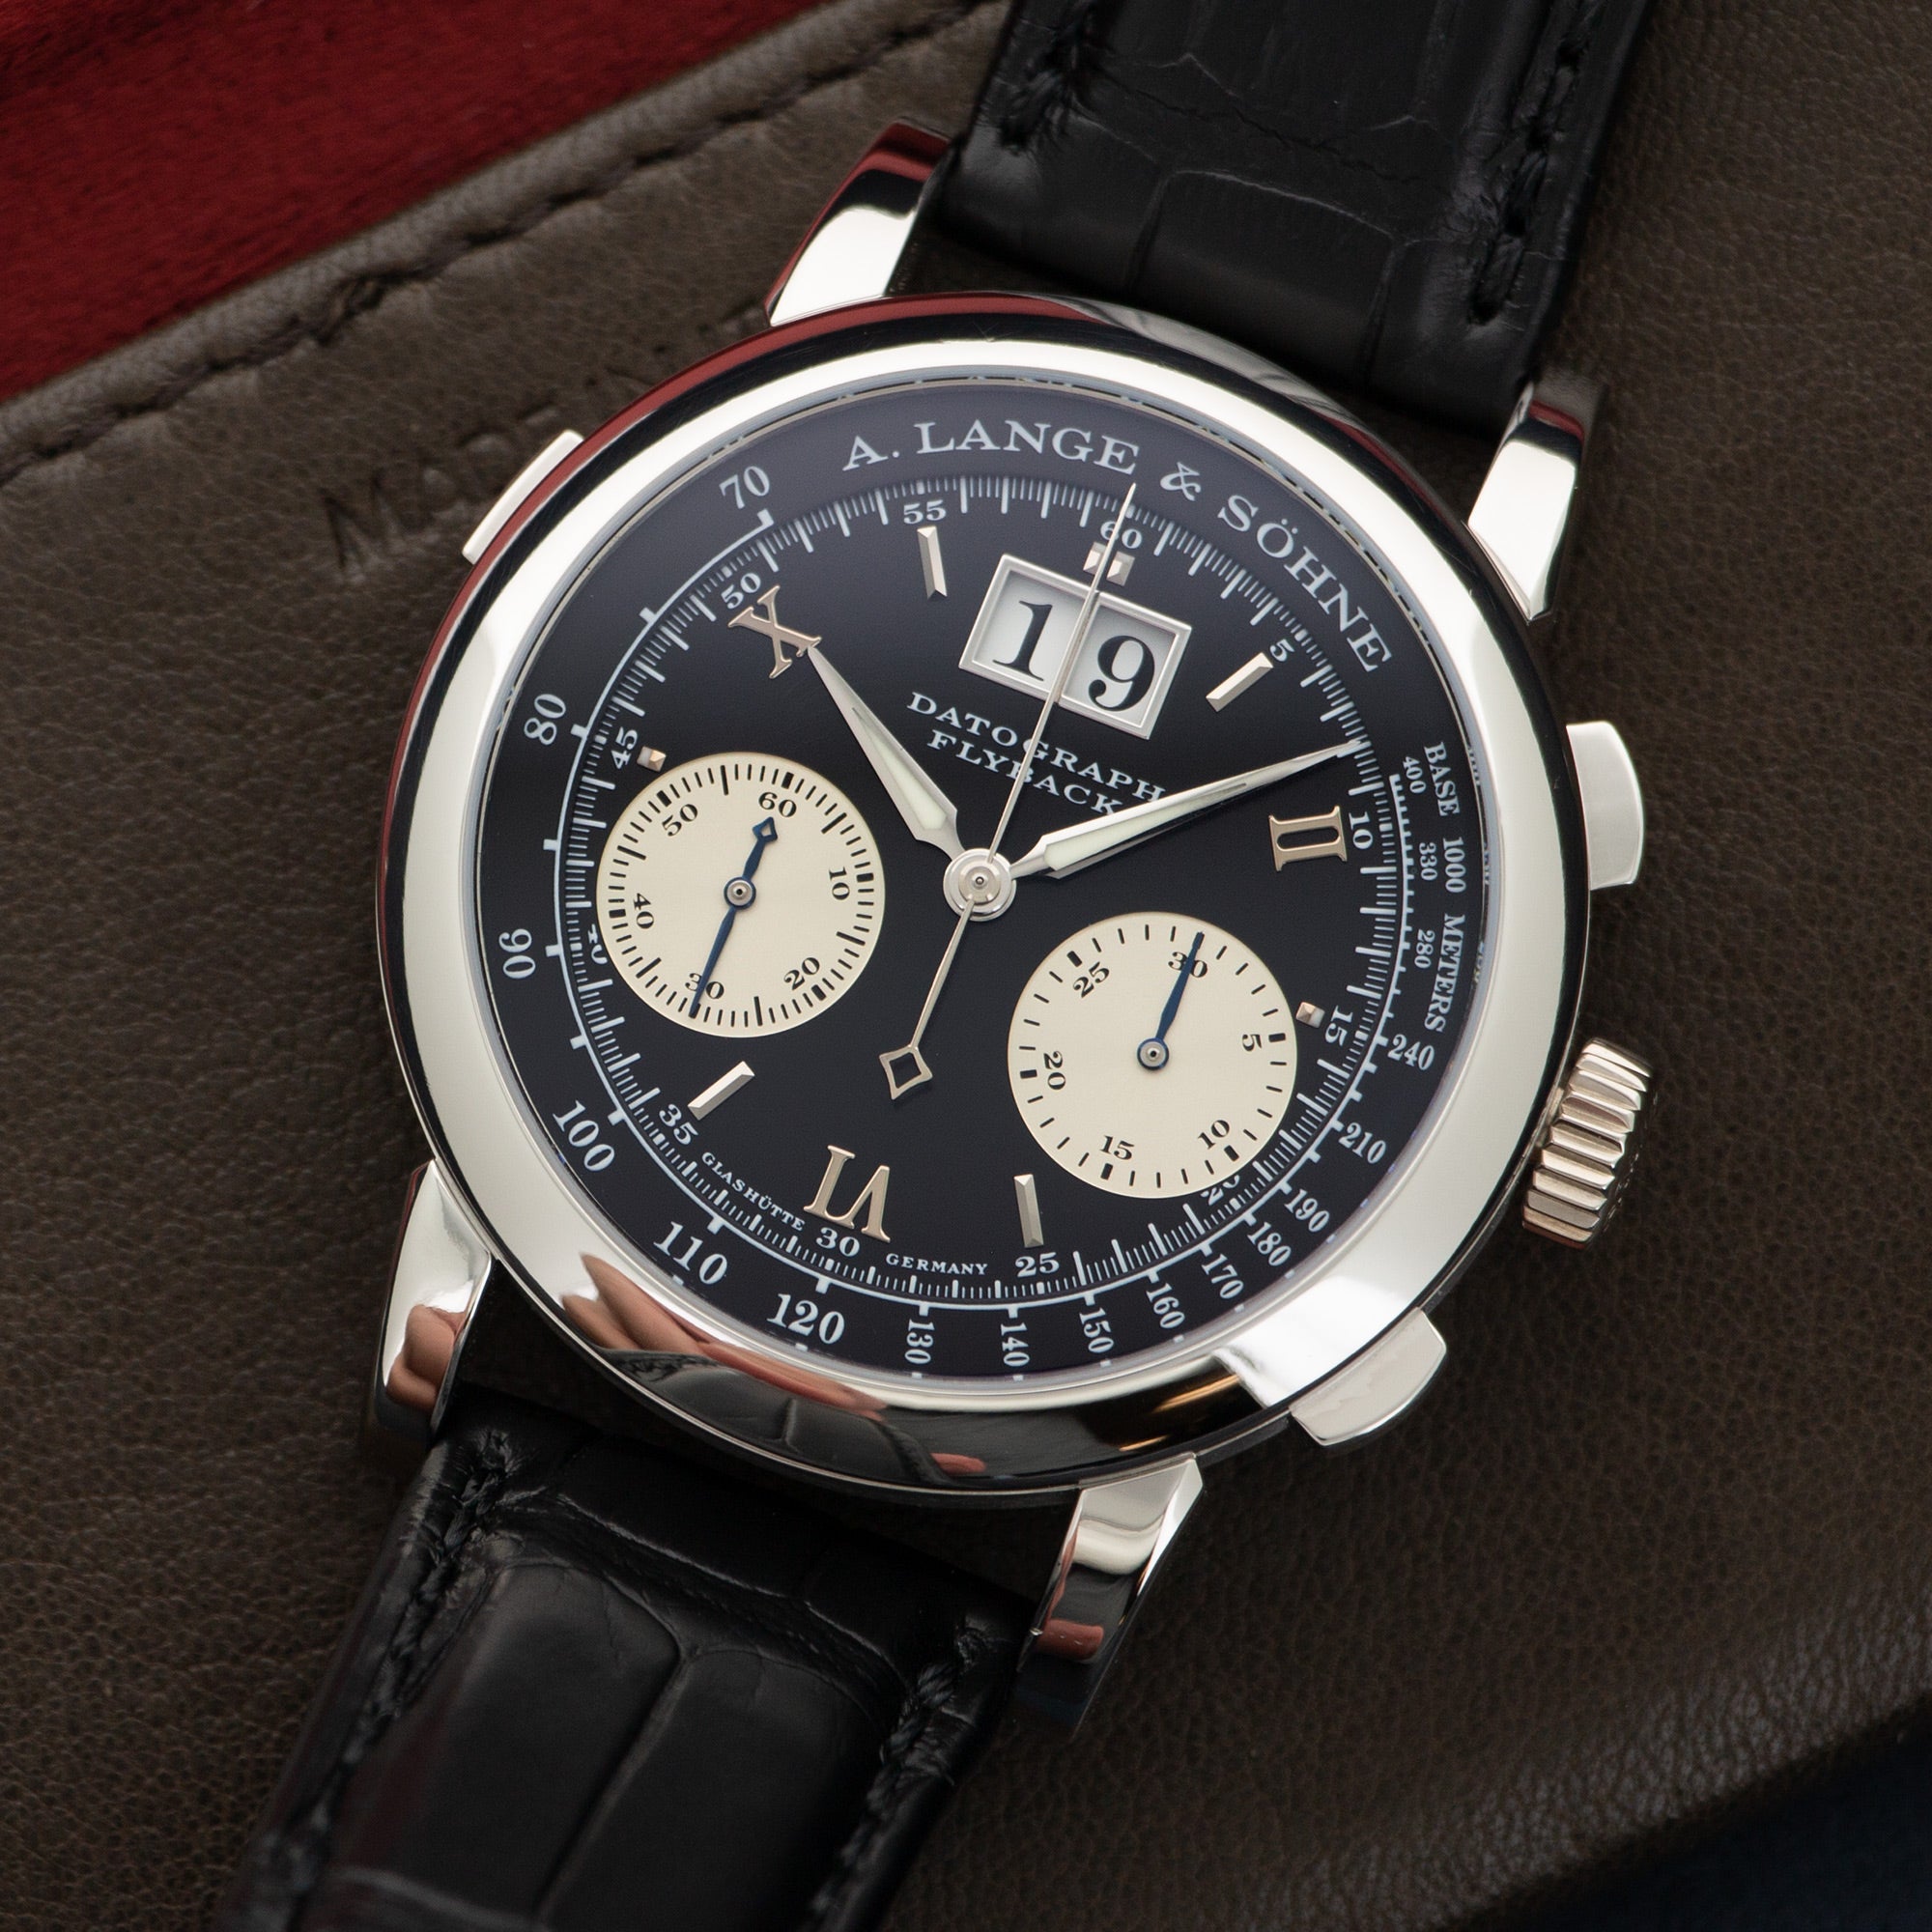 A. Lange & Sohne - A. Lange & Sohne Platinum Datograph Watch Ref. 403.035 - The Keystone Watches